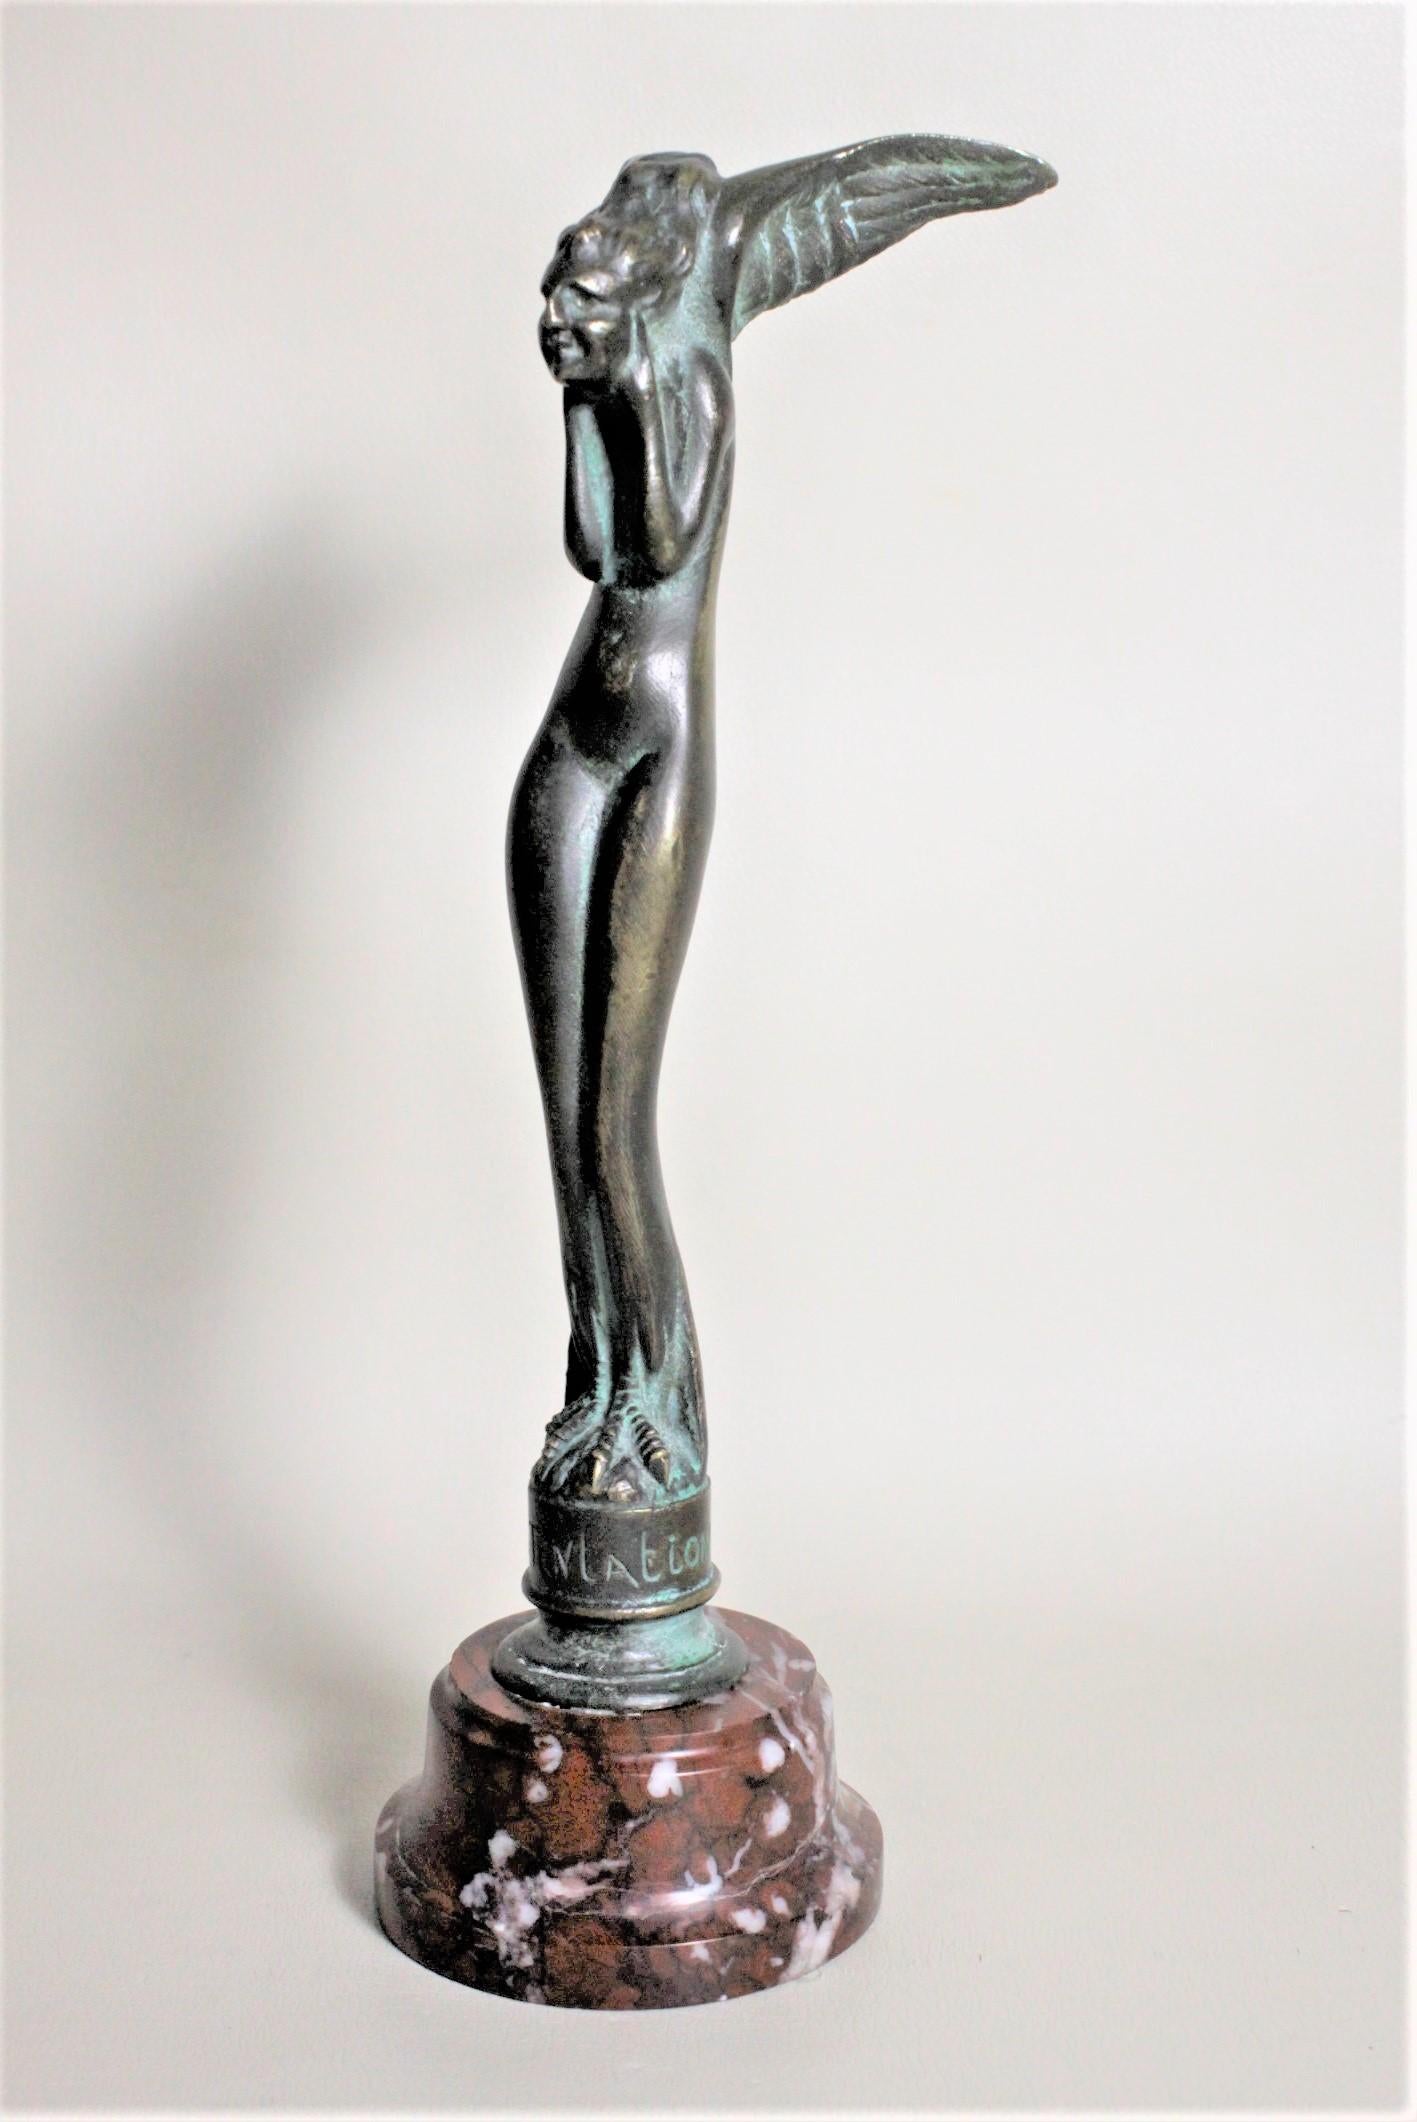 This Art Deco patinated bronze sculpture was done by Serge Zelikson of France in circa 1920 in the period Deco style. The bronze is ornately cast and depicts what some have called an angel, and is a nude female body with presumably a female head